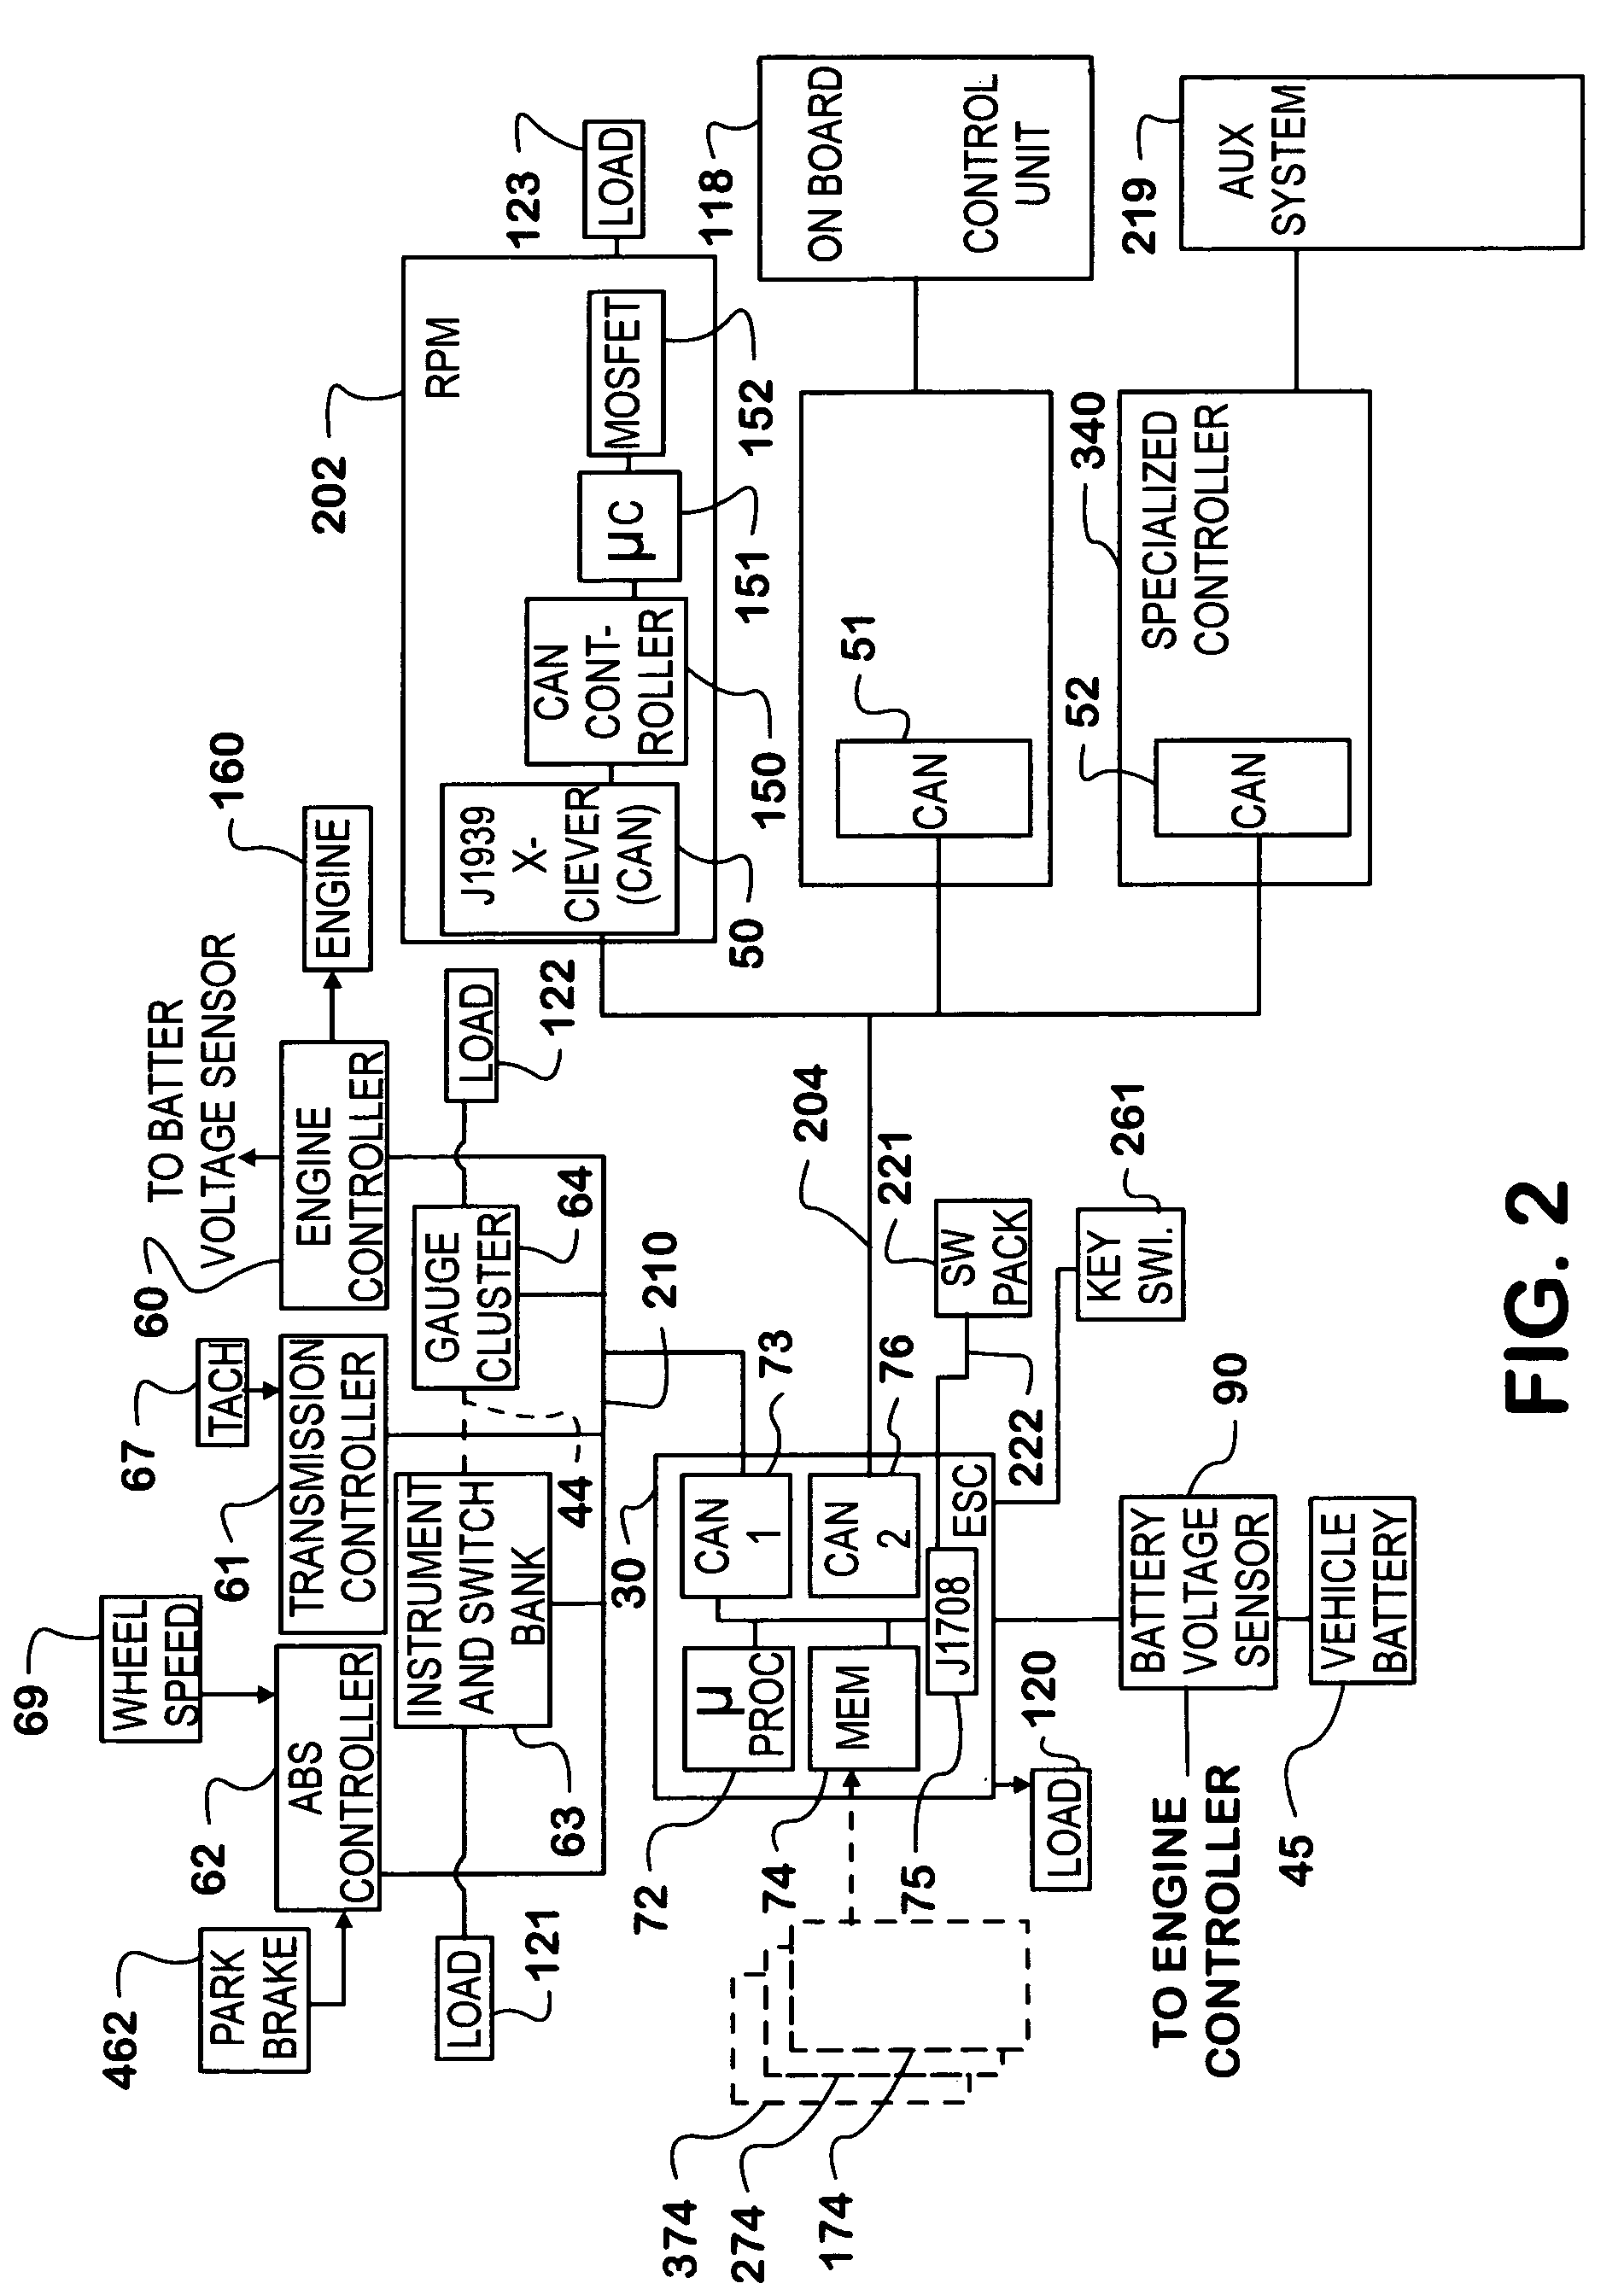 Automated vehicle battery protection with programmable load shedding and engine speed control